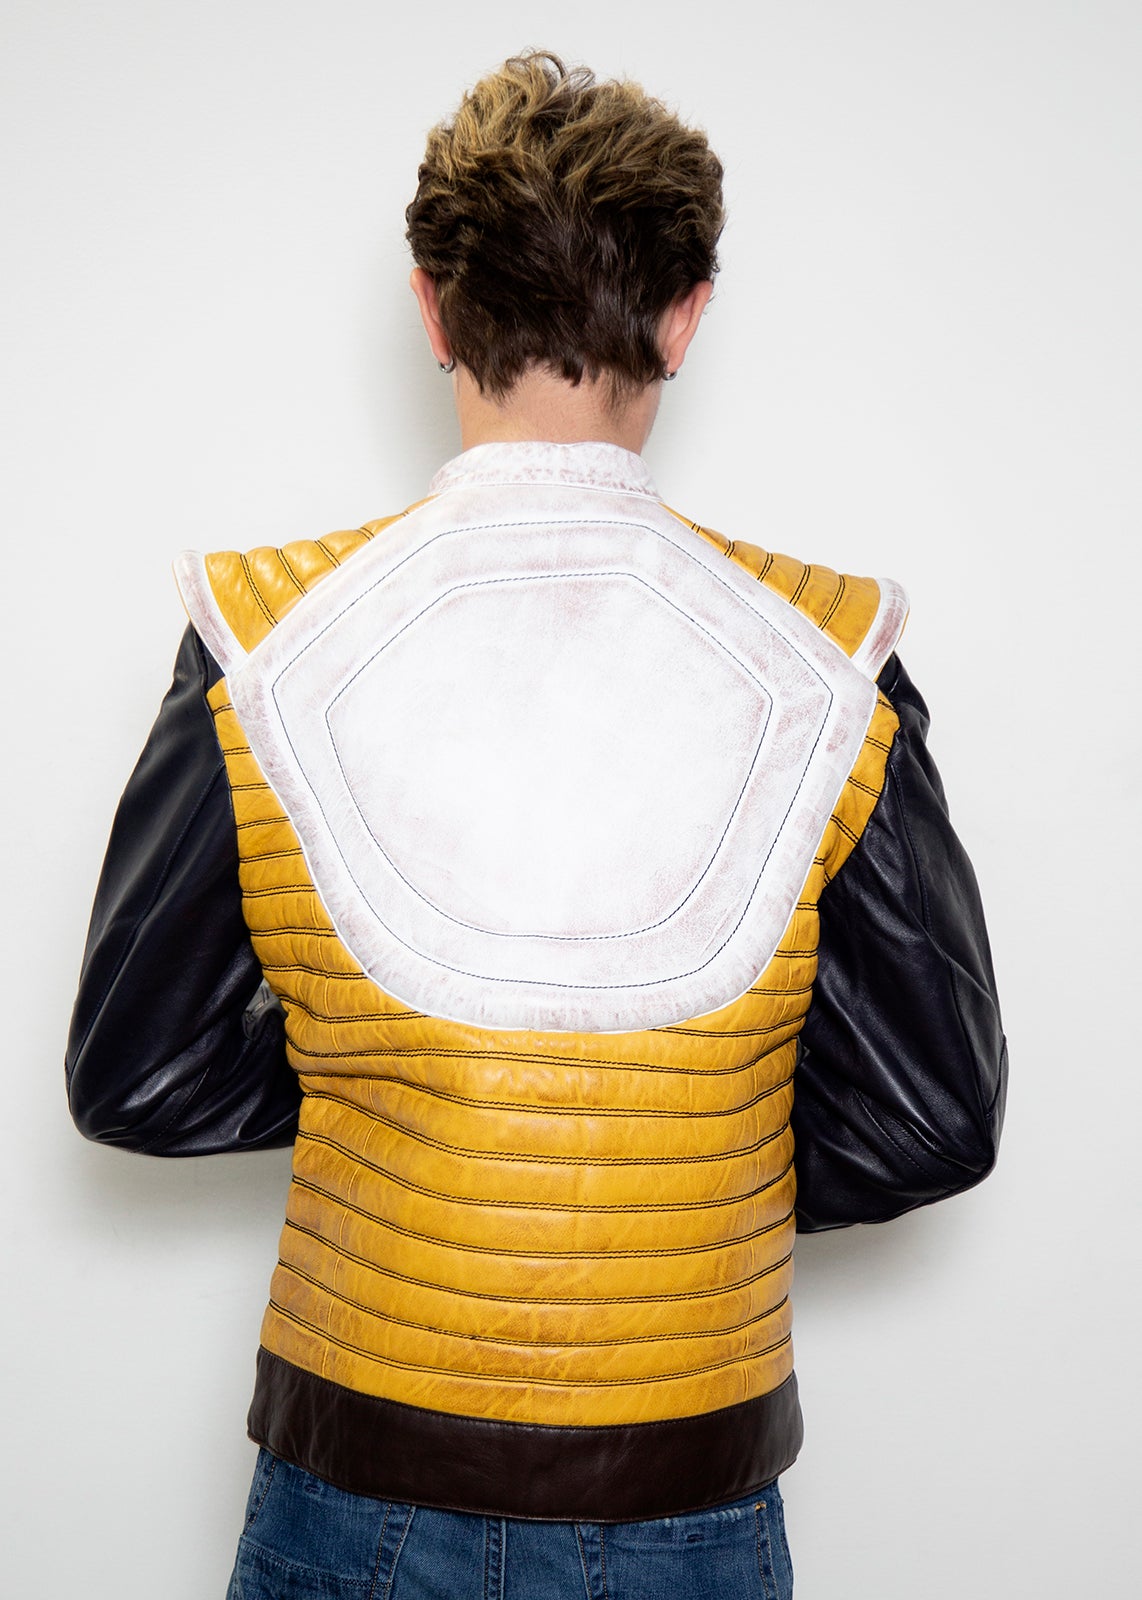 Load image into Gallery viewer, Vegeta Prince of Saiyans Dragon Ball Z Mens Faux Leather Jacket by Luca Designs
